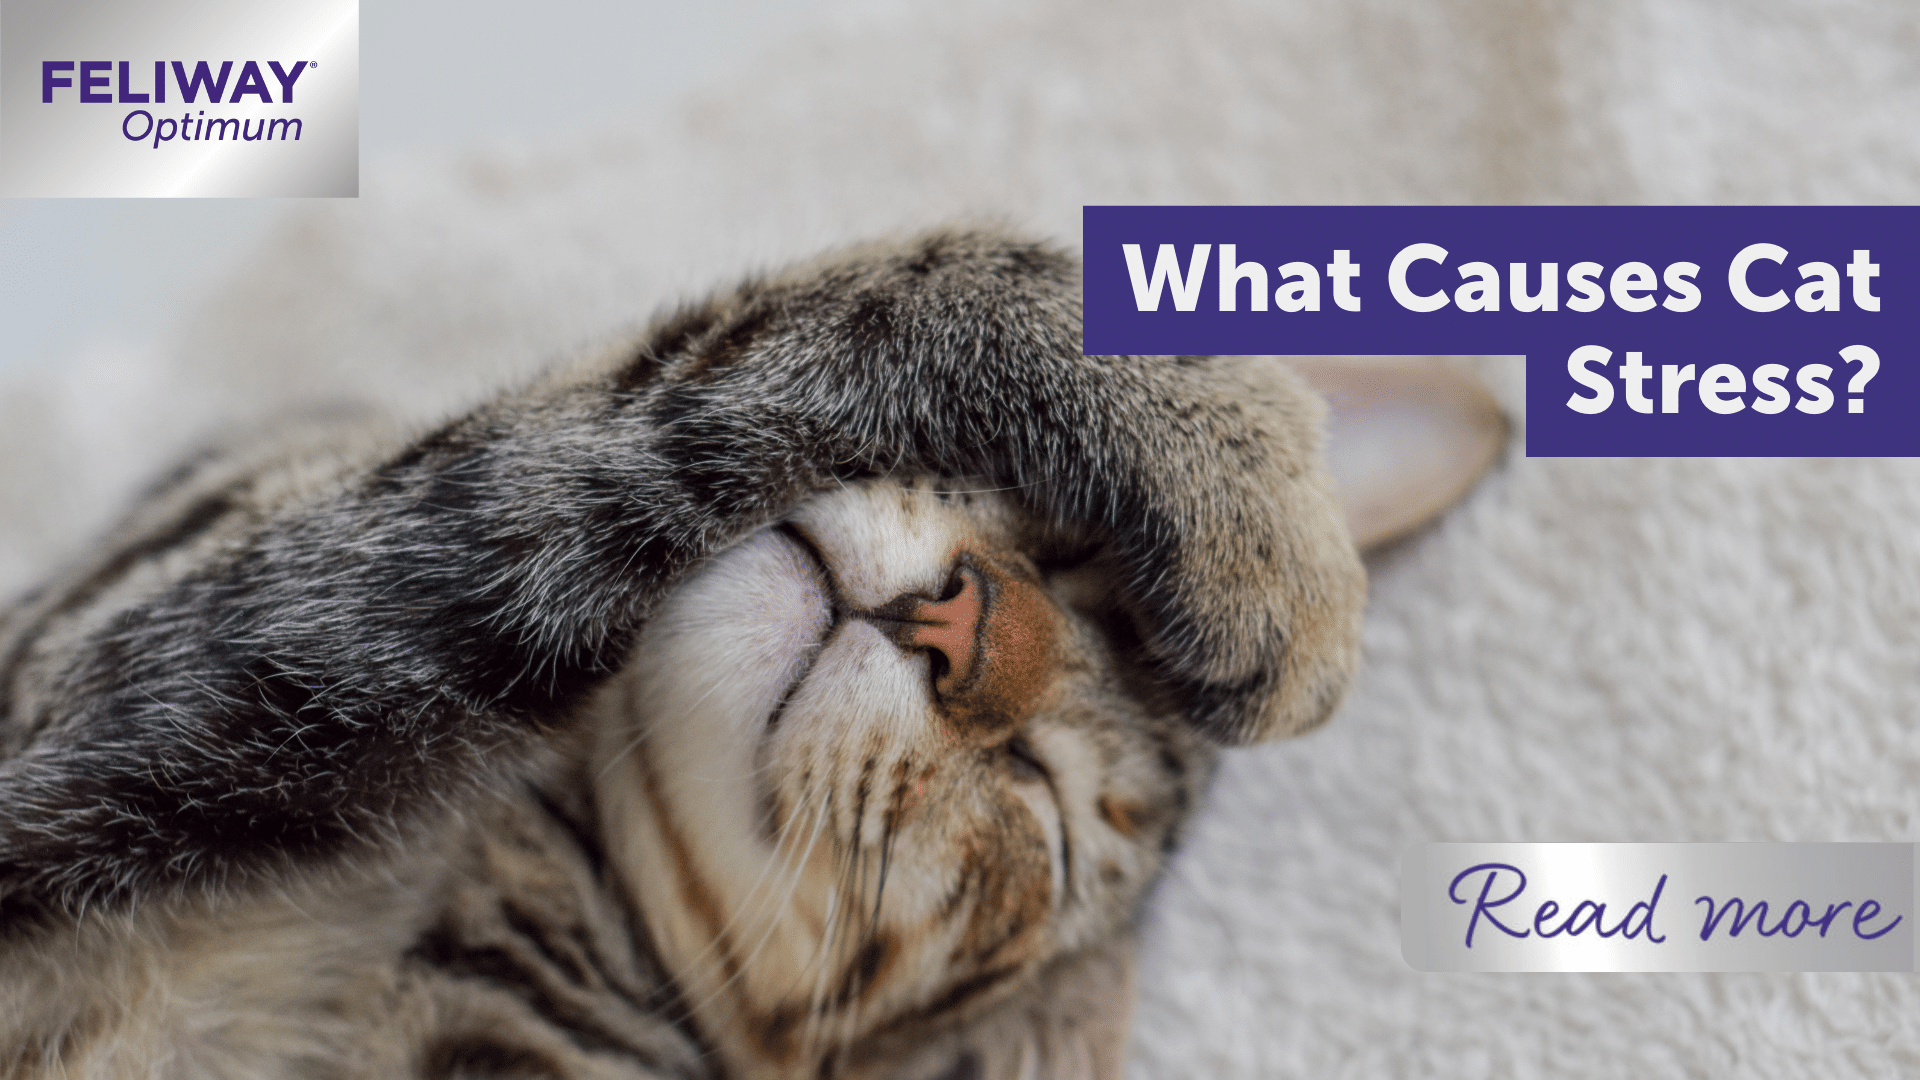 What causes cat stress?